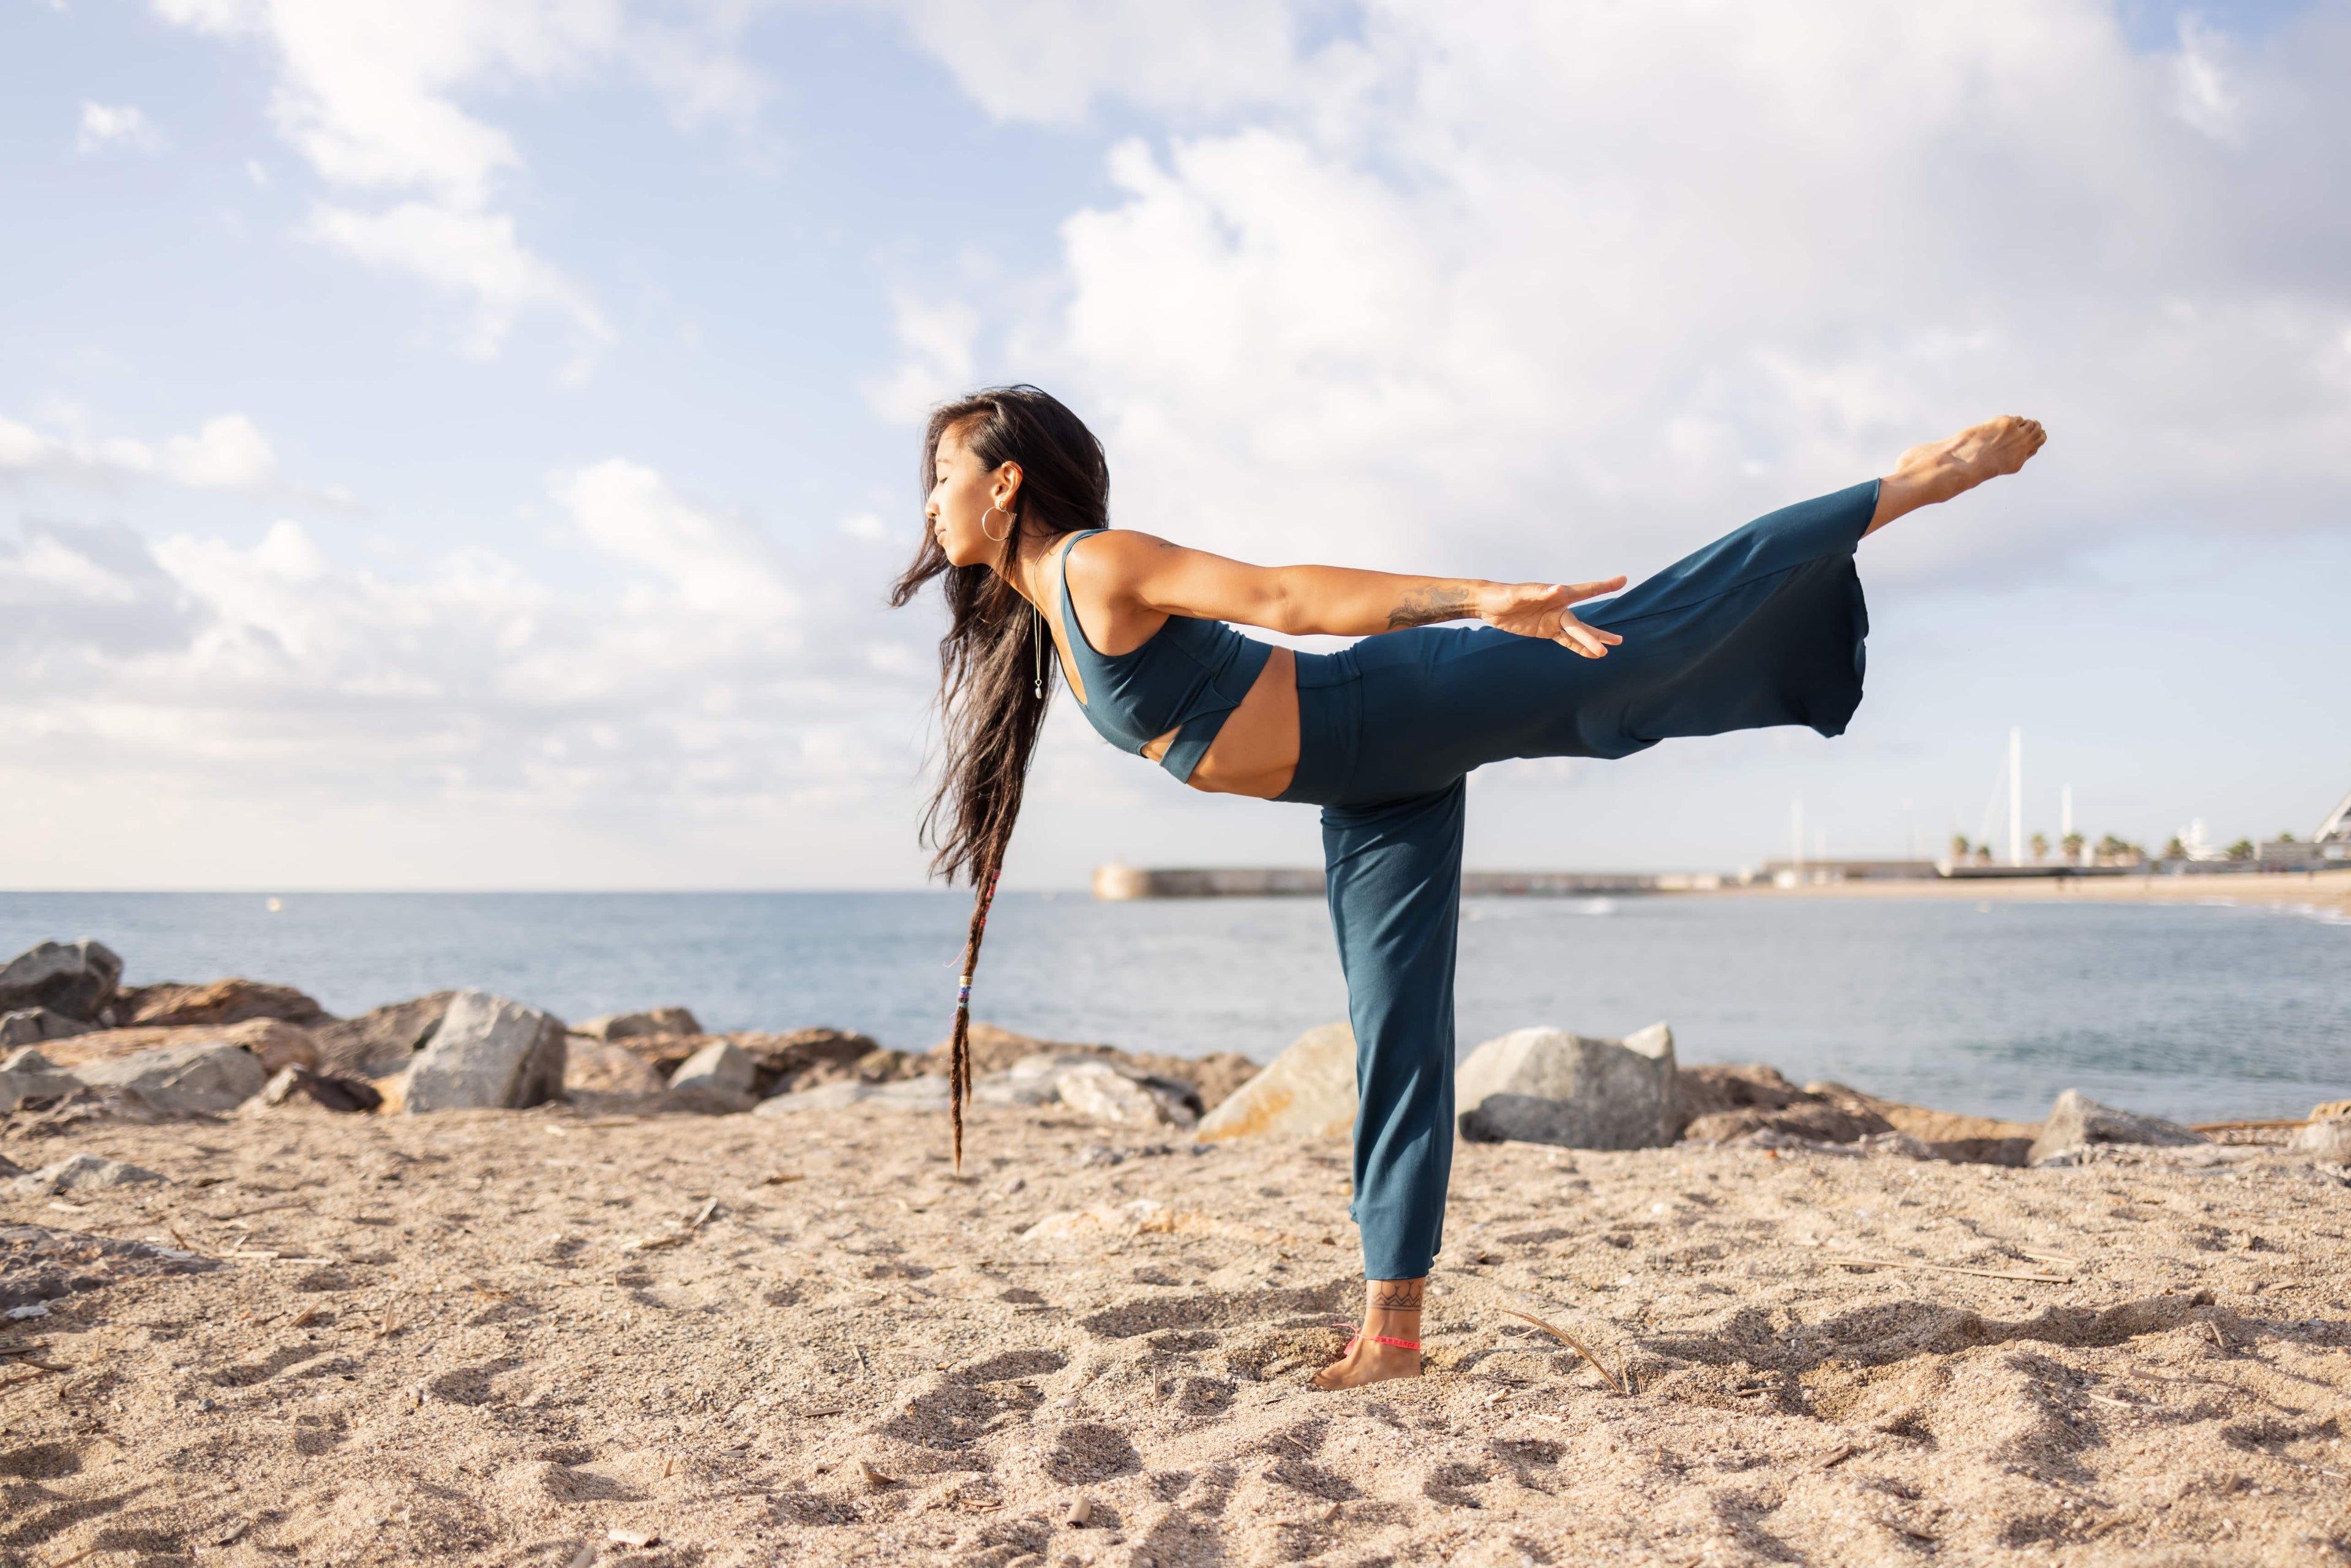 Sustainable yoga practice by the sea - woman in eco-friendly bamboo yoga wear from Shambhala, embodying harmony with nature